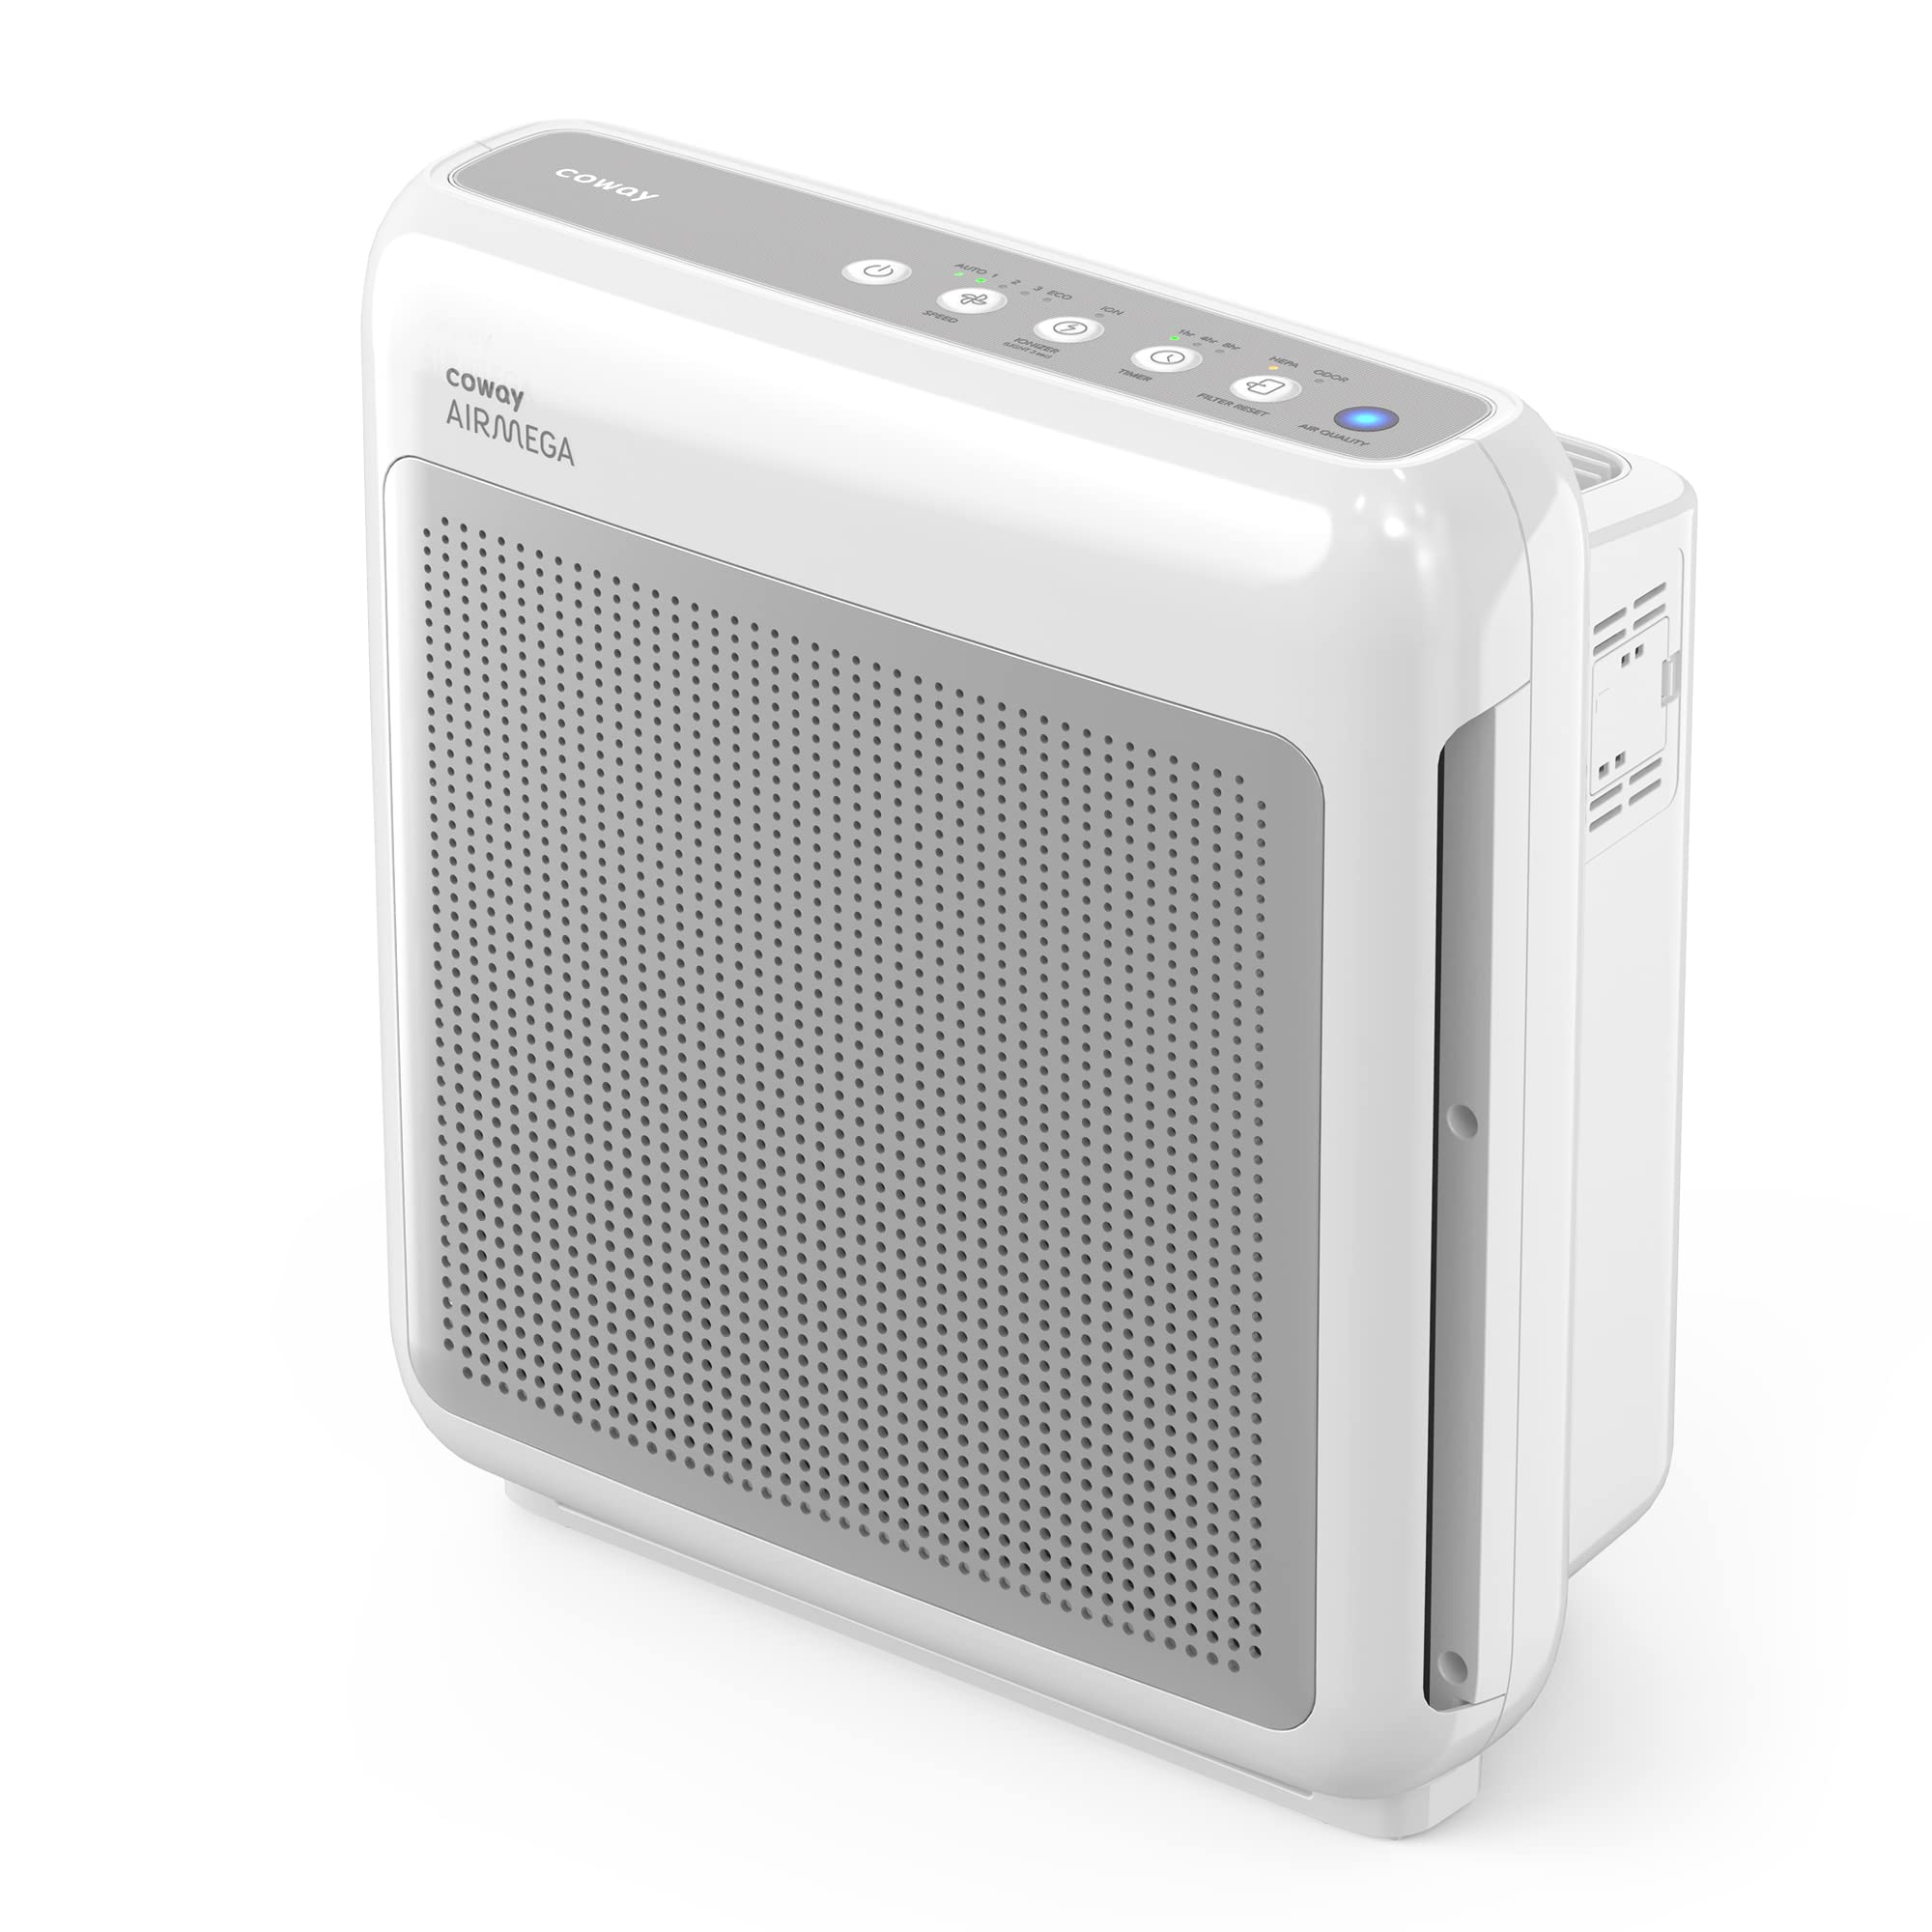 Coway Airmega 200M True HEPA and Activated-Carbon Air Purifier, AP-1518R - White (Prime members) $139.99